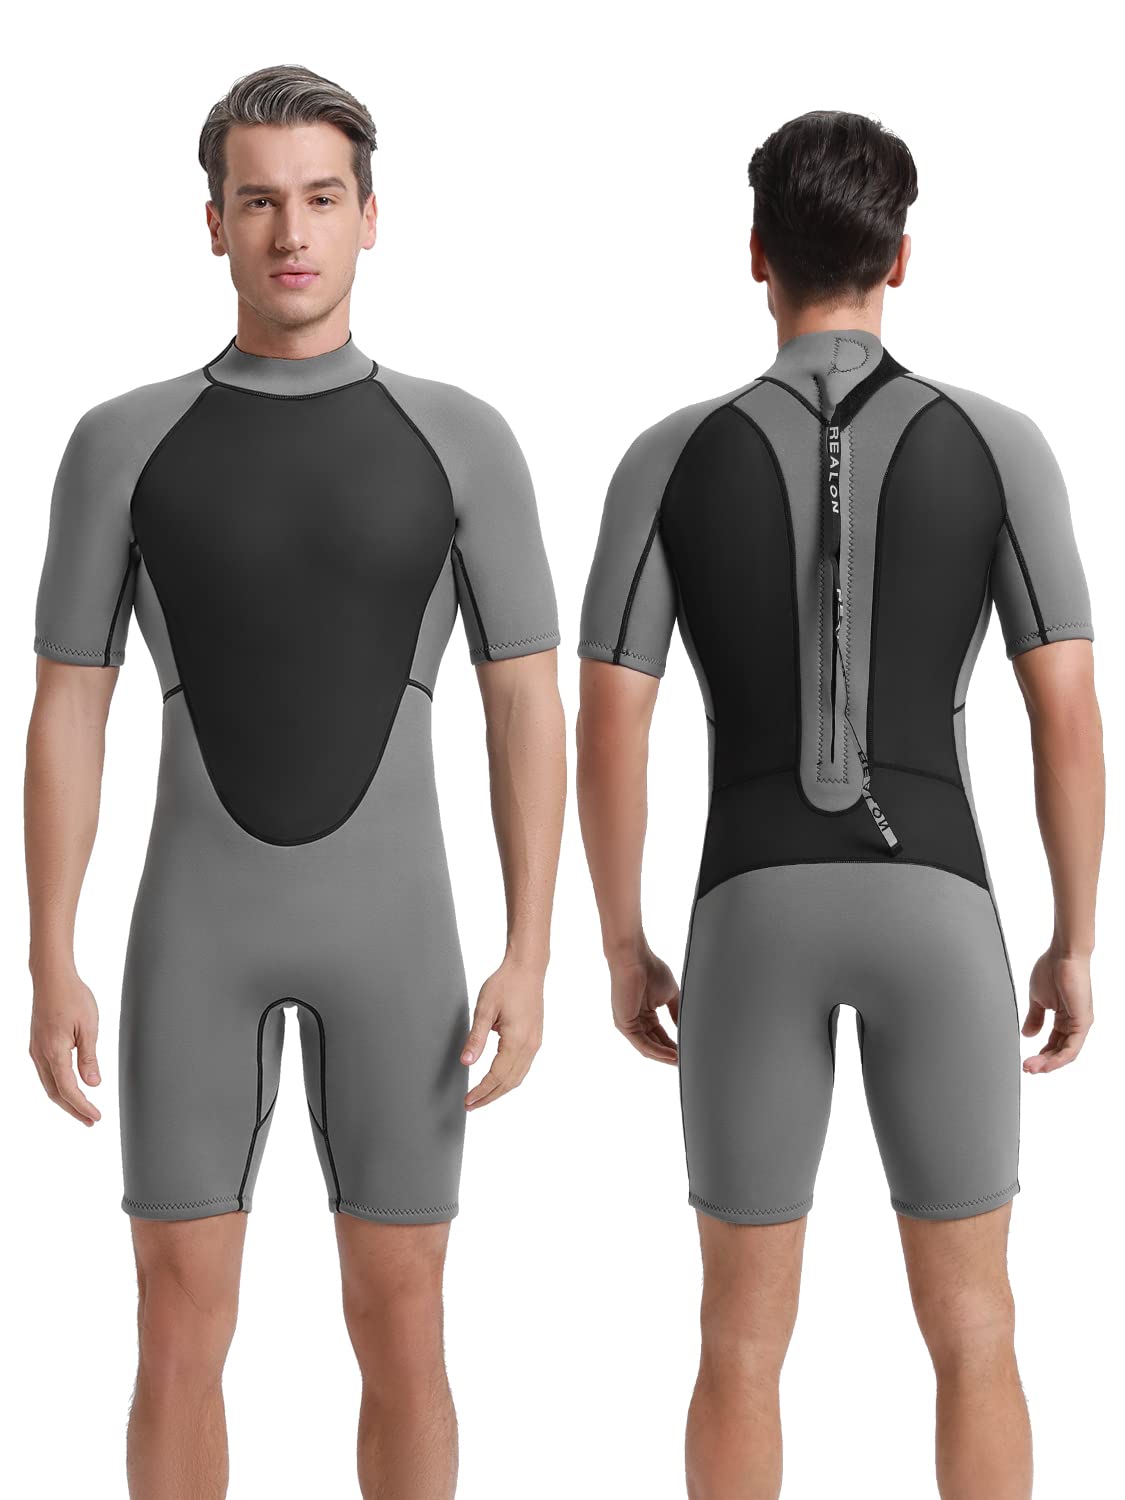 REALON Shorty Wetsuit Women and Men 3mm, 2mm Short Sleeves